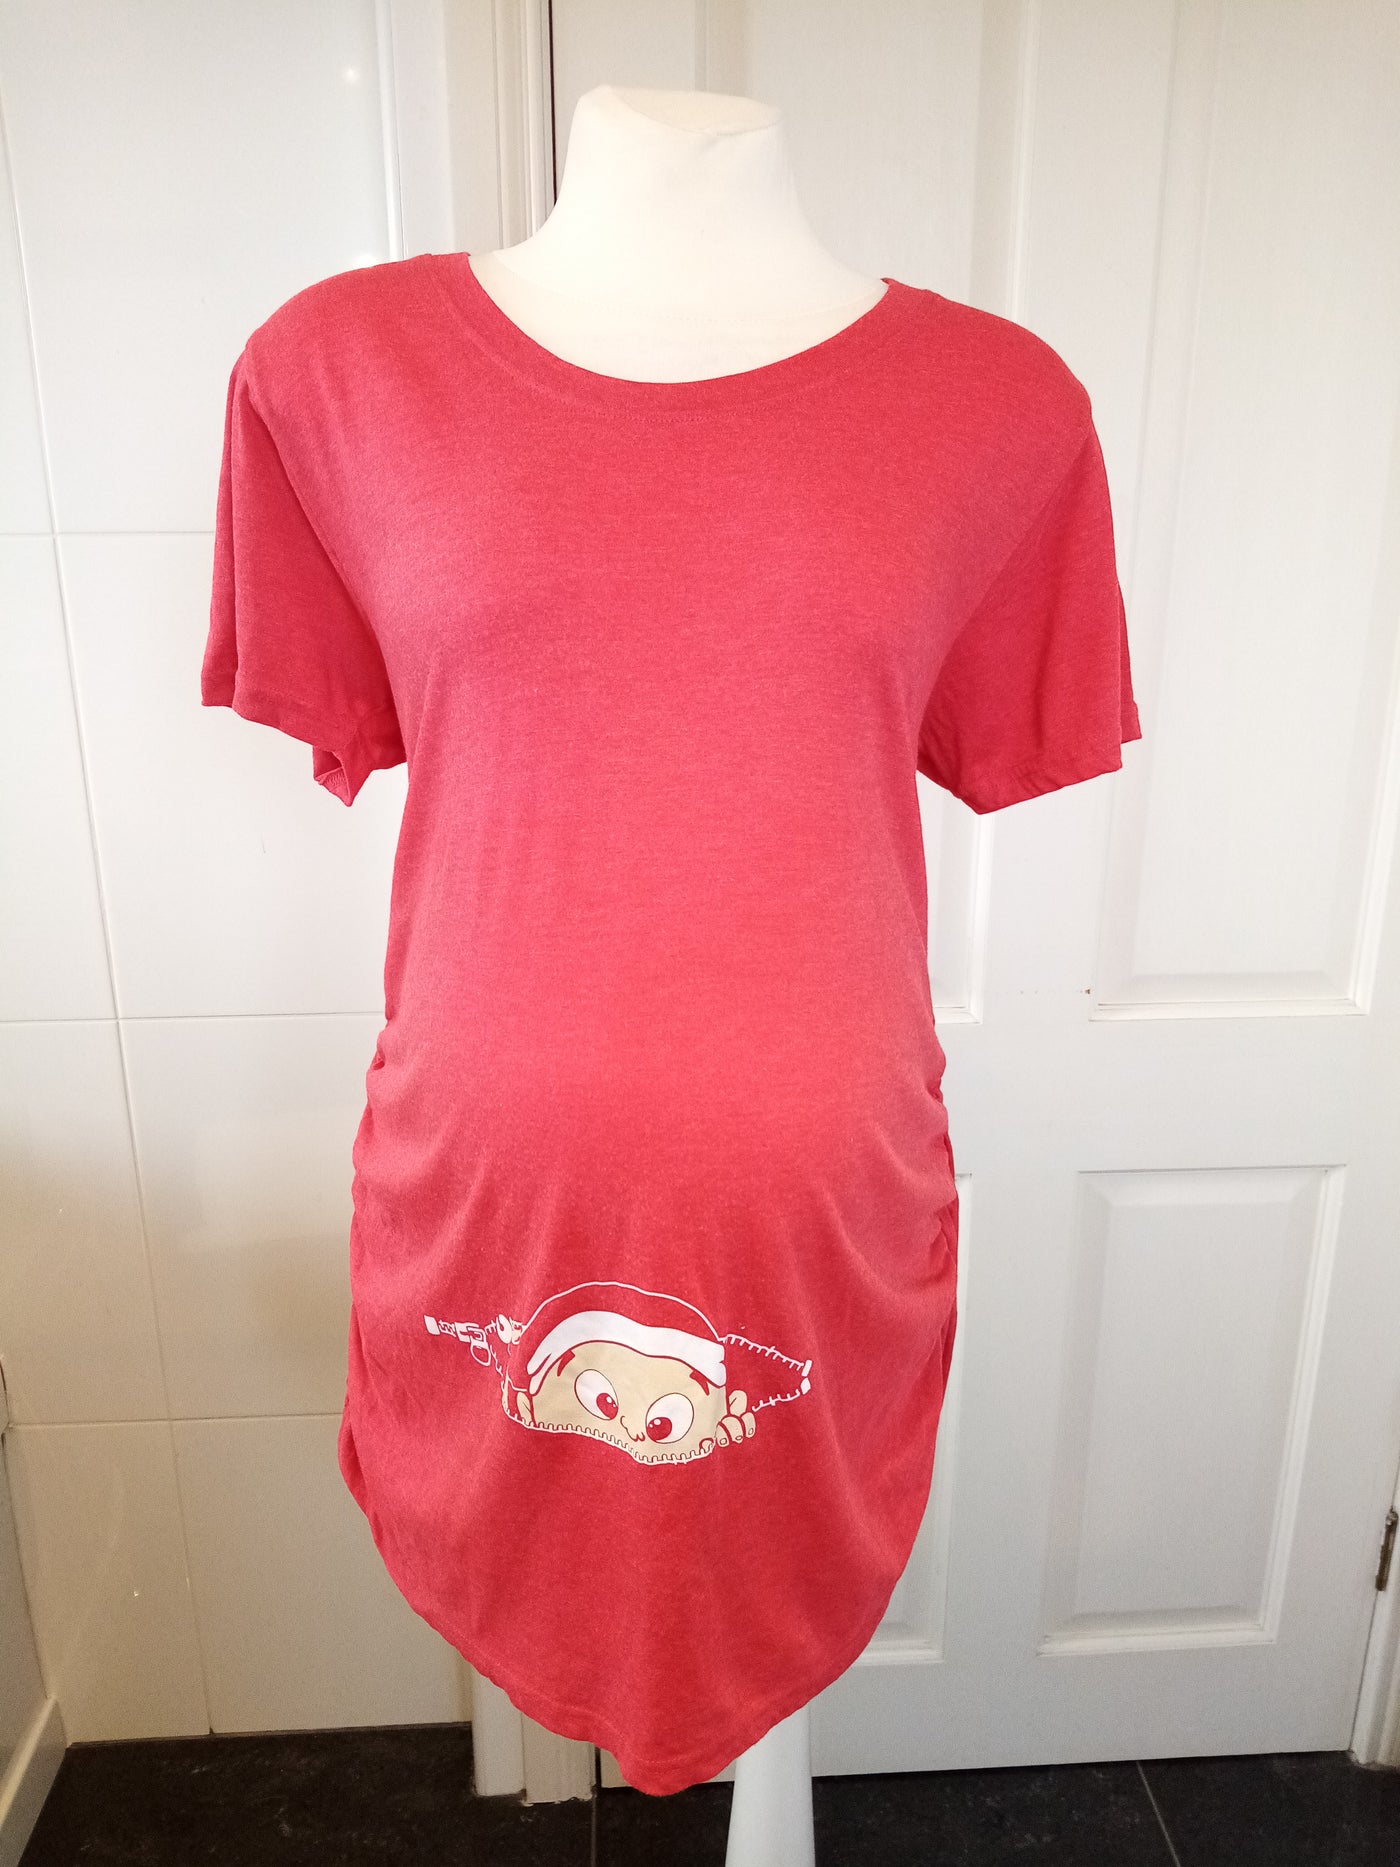 Crazydog T-Shirts Red Peeping Baby t-shirt - Size XL (Approx UK 14)